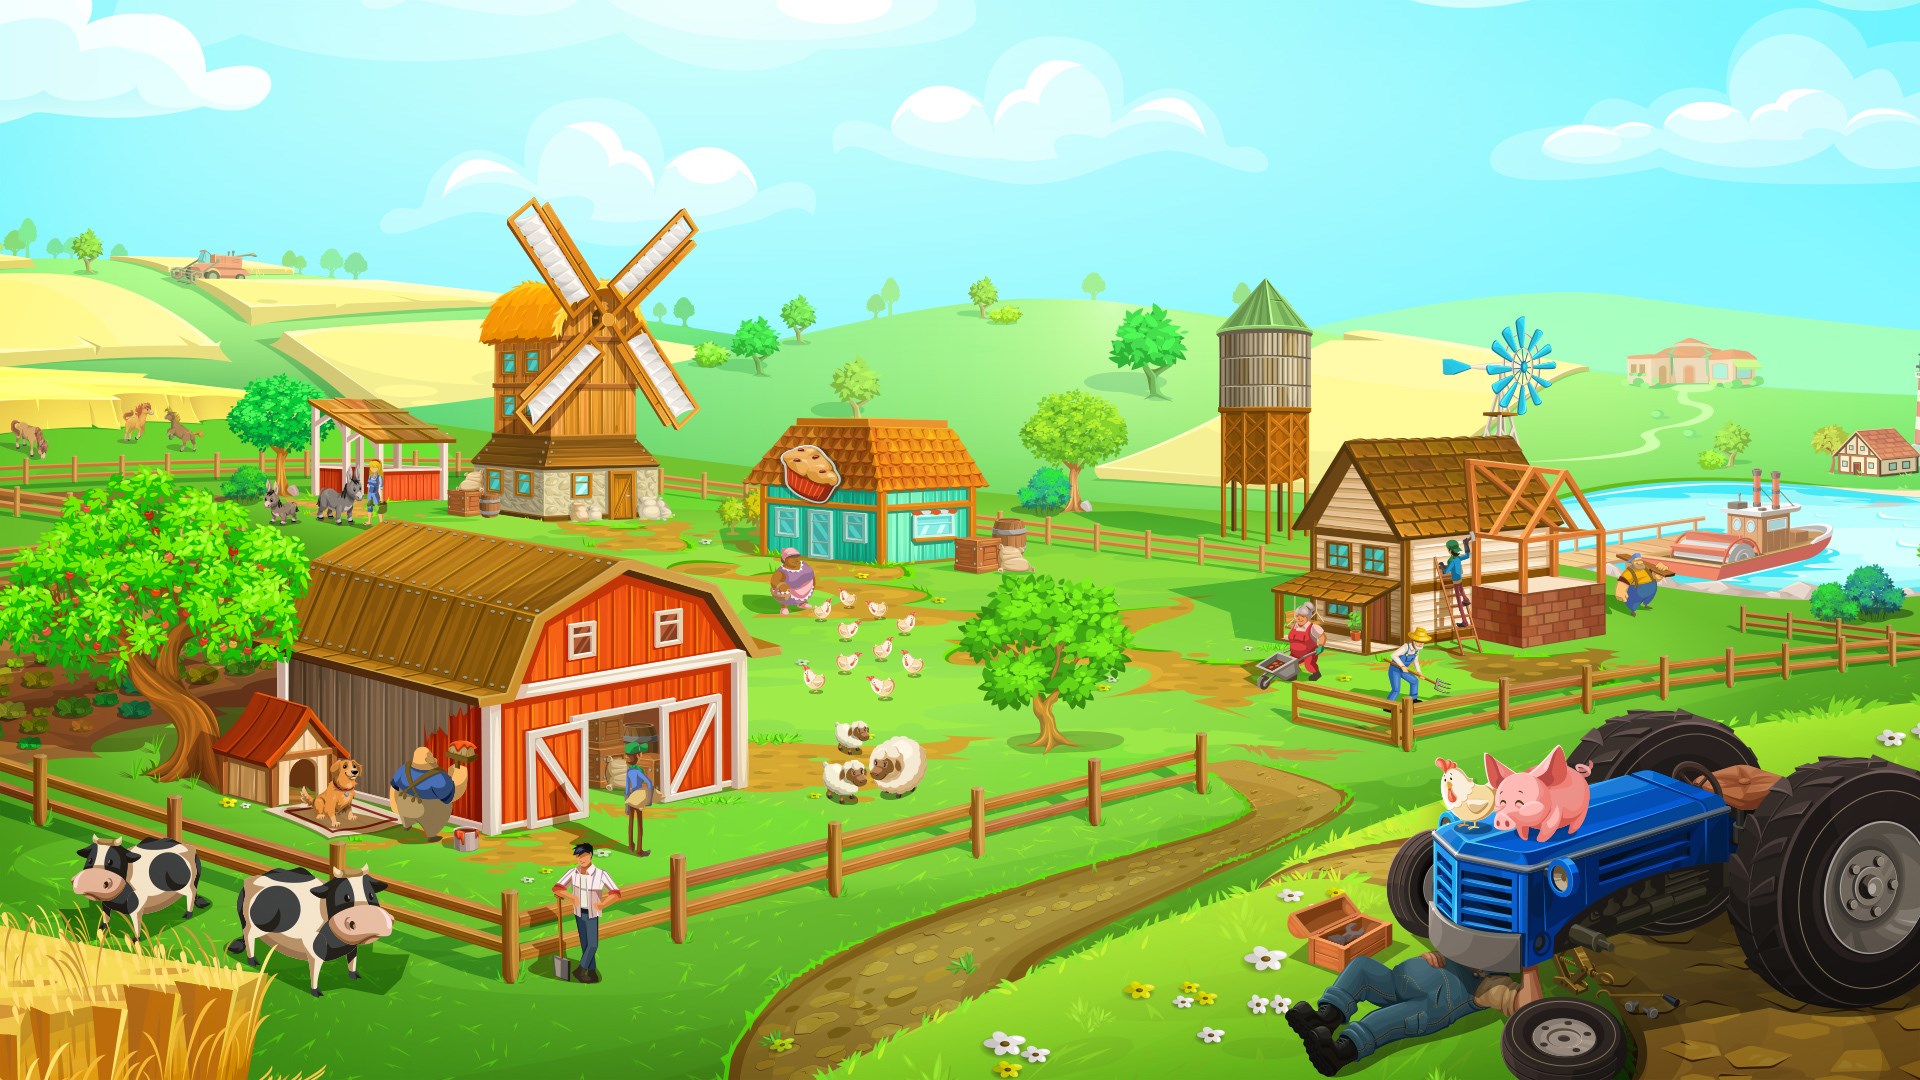 download the last version for ipod Goodgame Big Farm